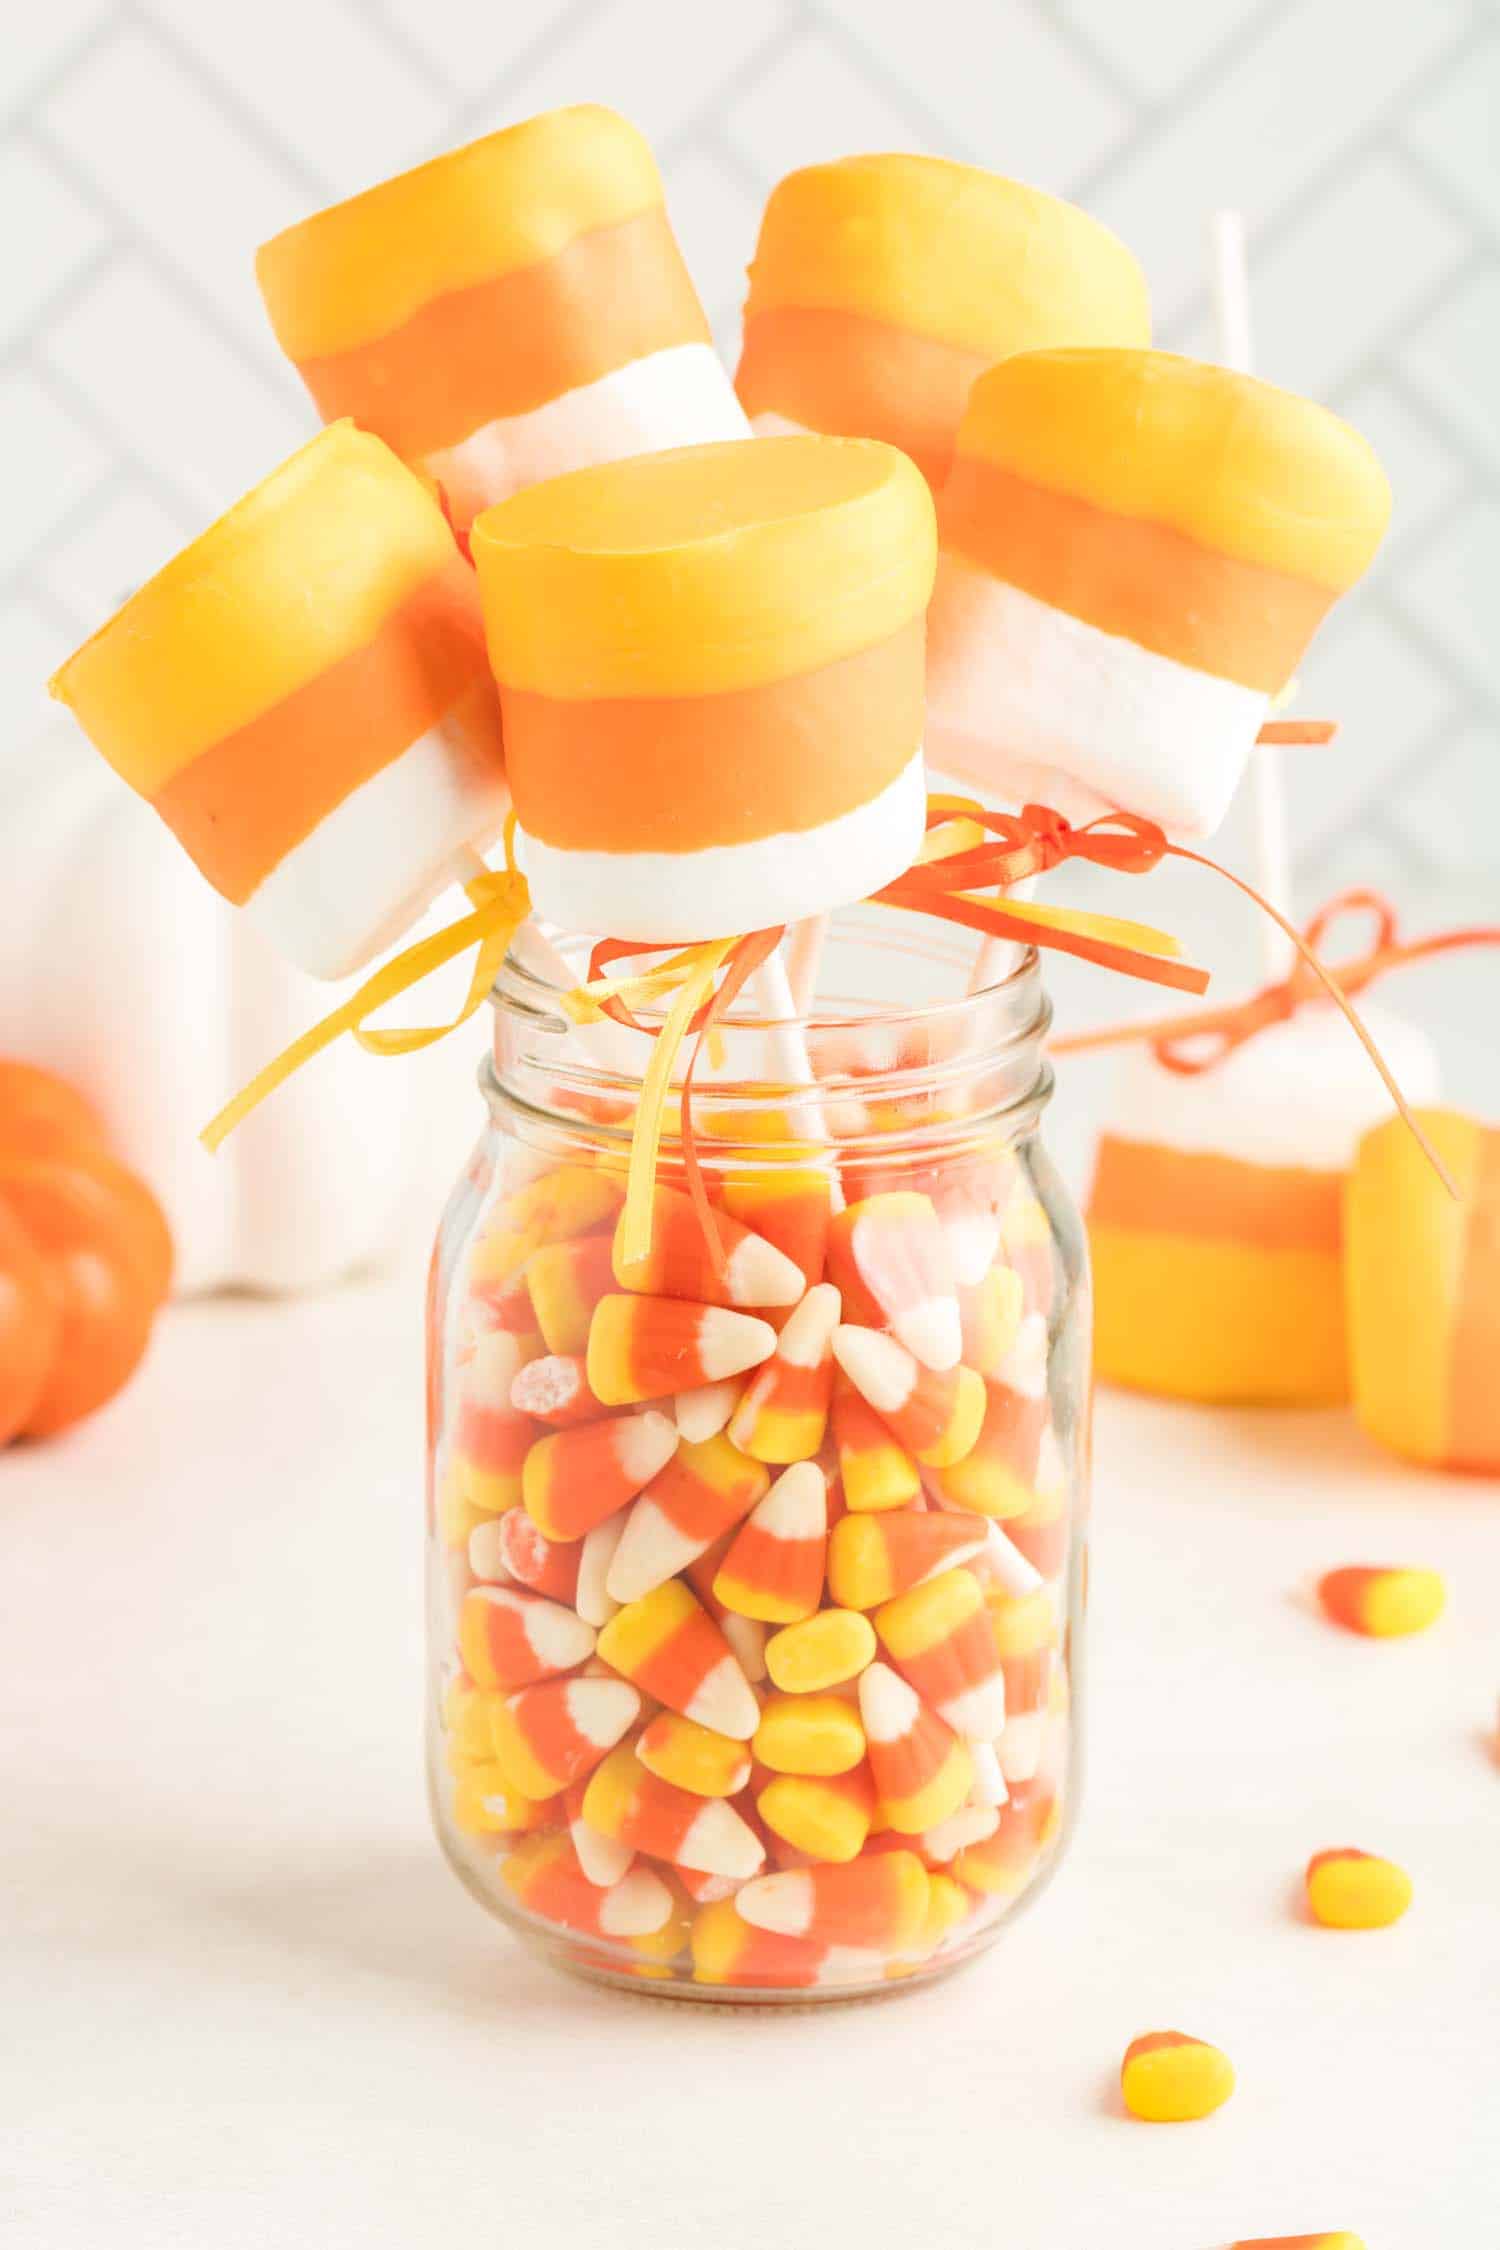 Five candy corn marshmallow pops in a glass jar filled with candycorn.